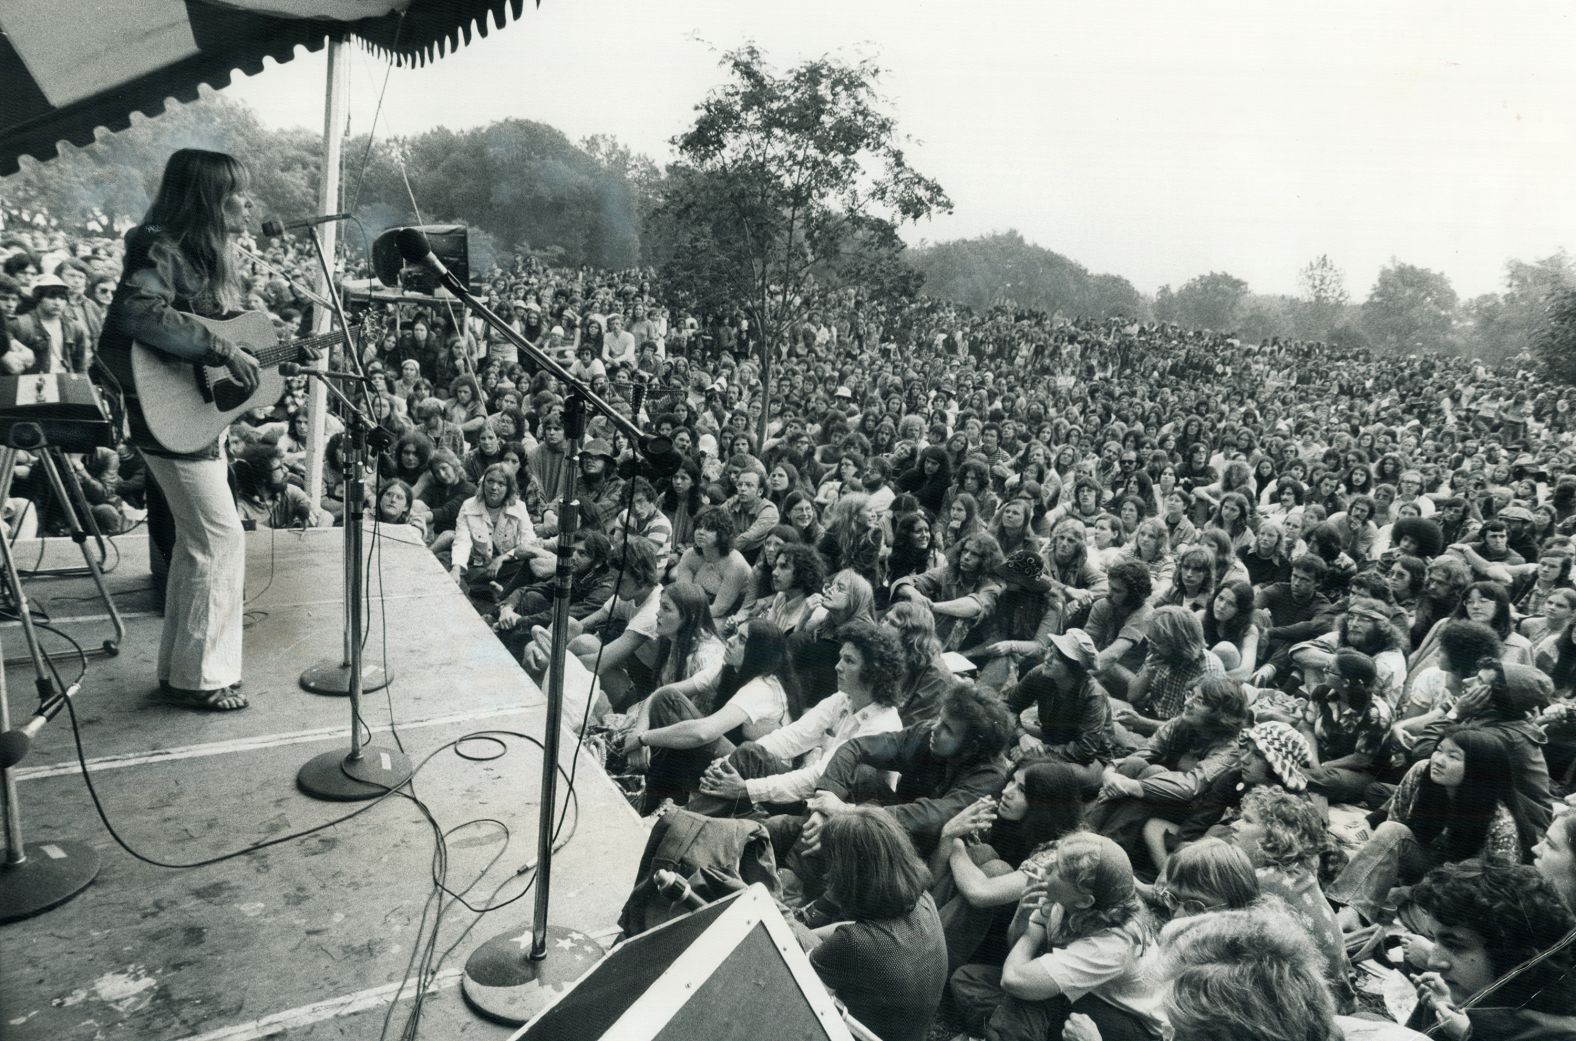 Mitchell performs at the Mariposa Folk Festival in Ontario, Canada, in 1972.